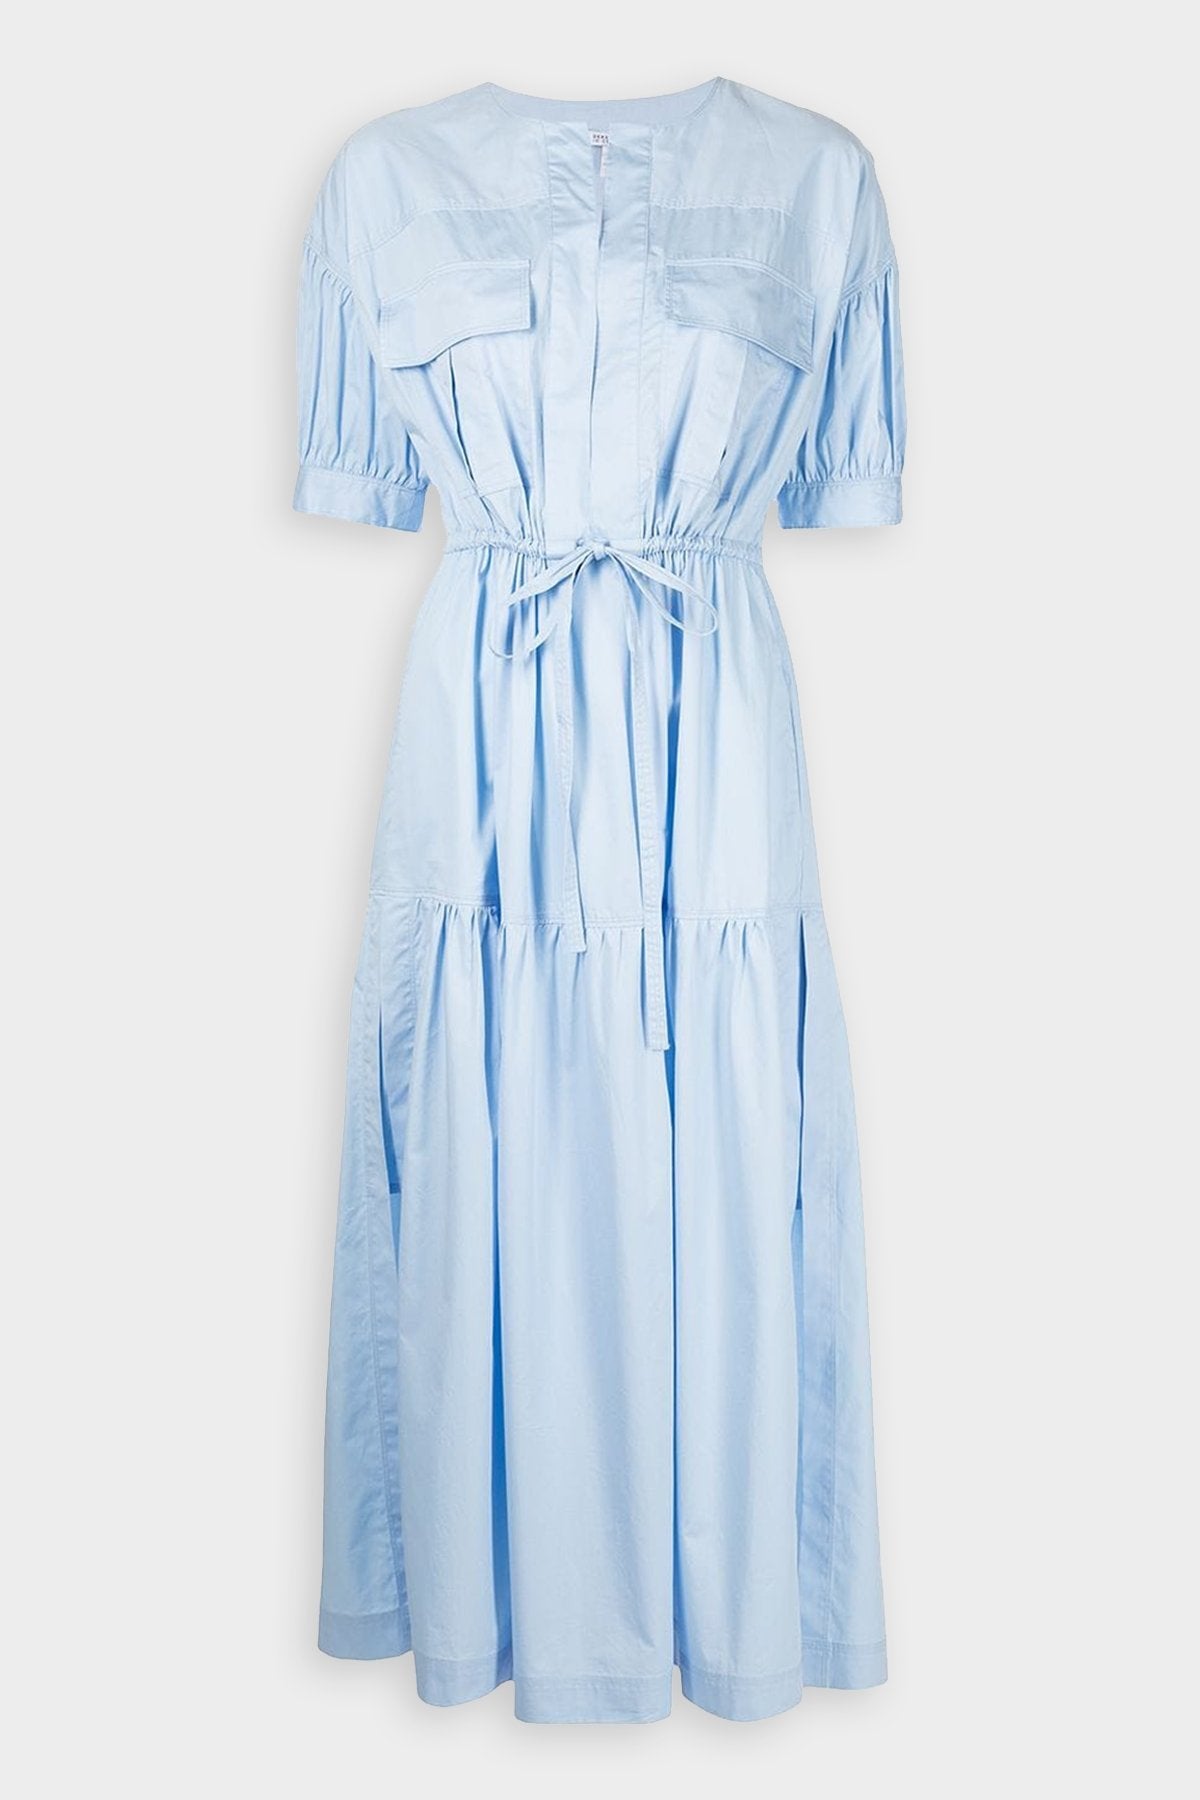 Andie Puff Sleeve Maxi Dress in Pale Blue - shop-olivia.com